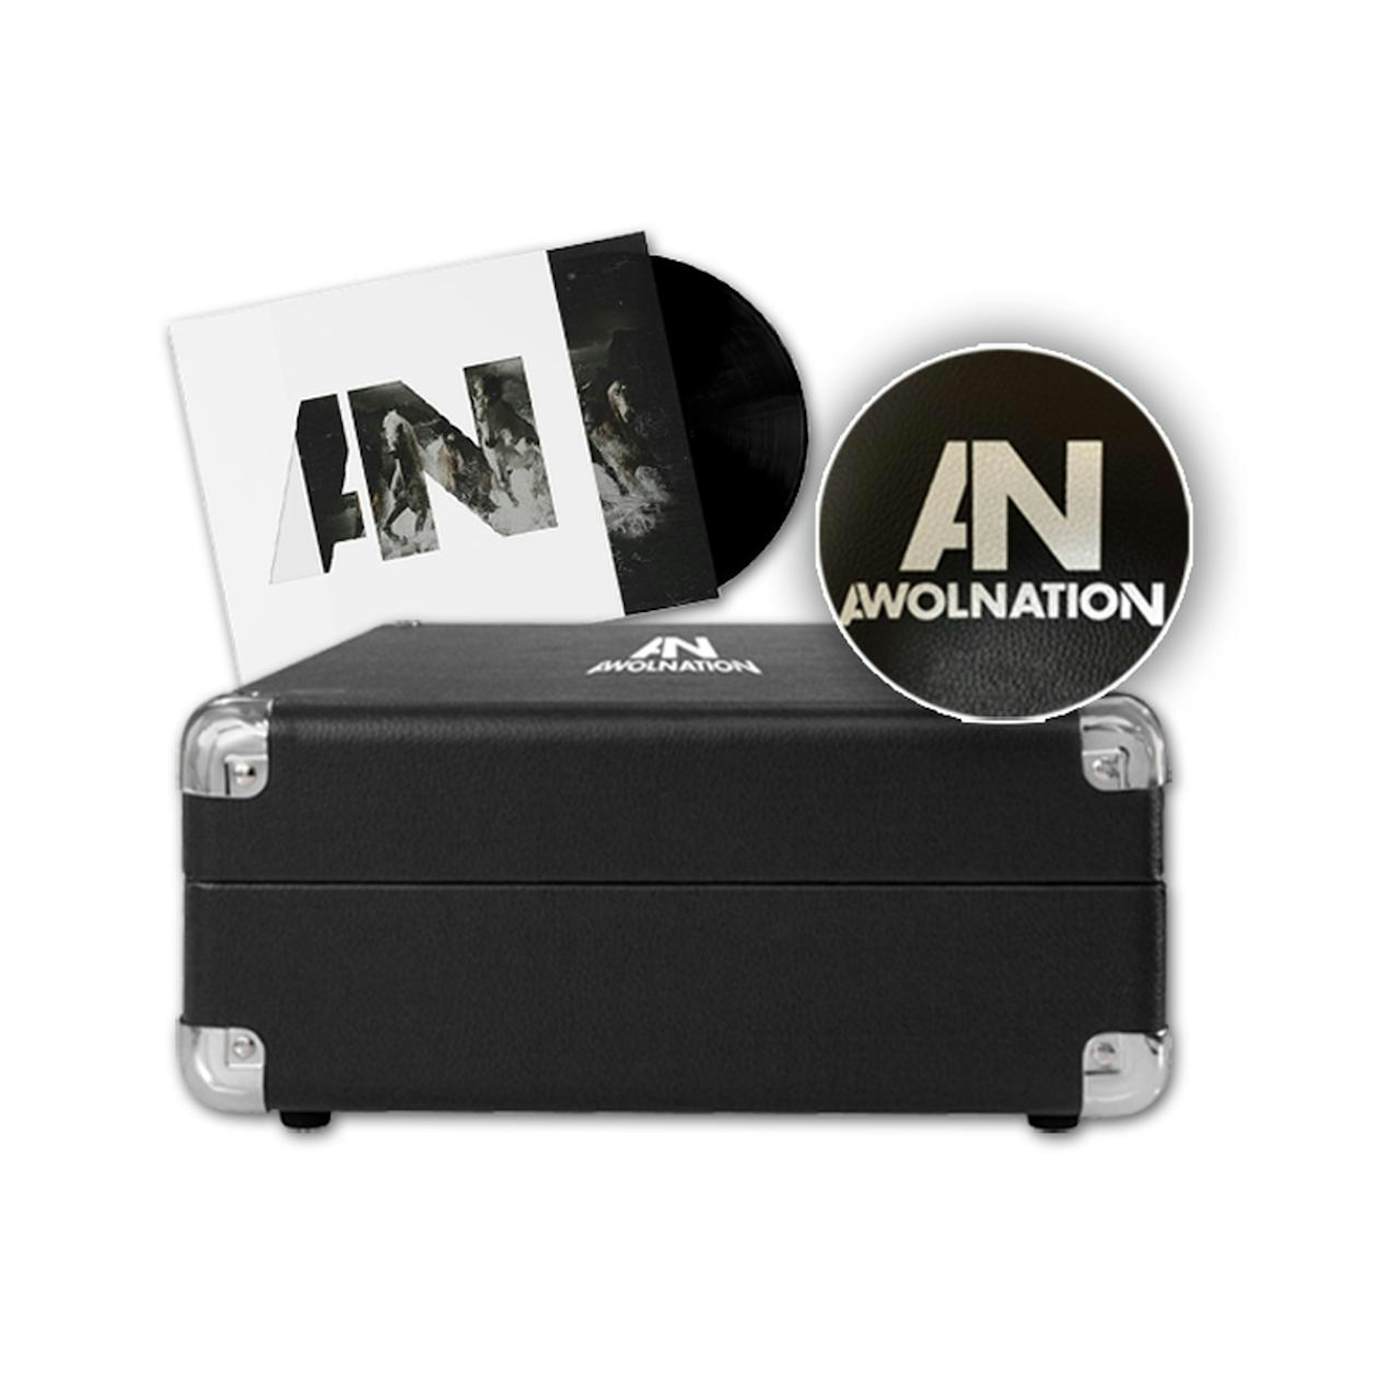 AWOLNATION Limited Edition Turntable and Vinyl Bundle